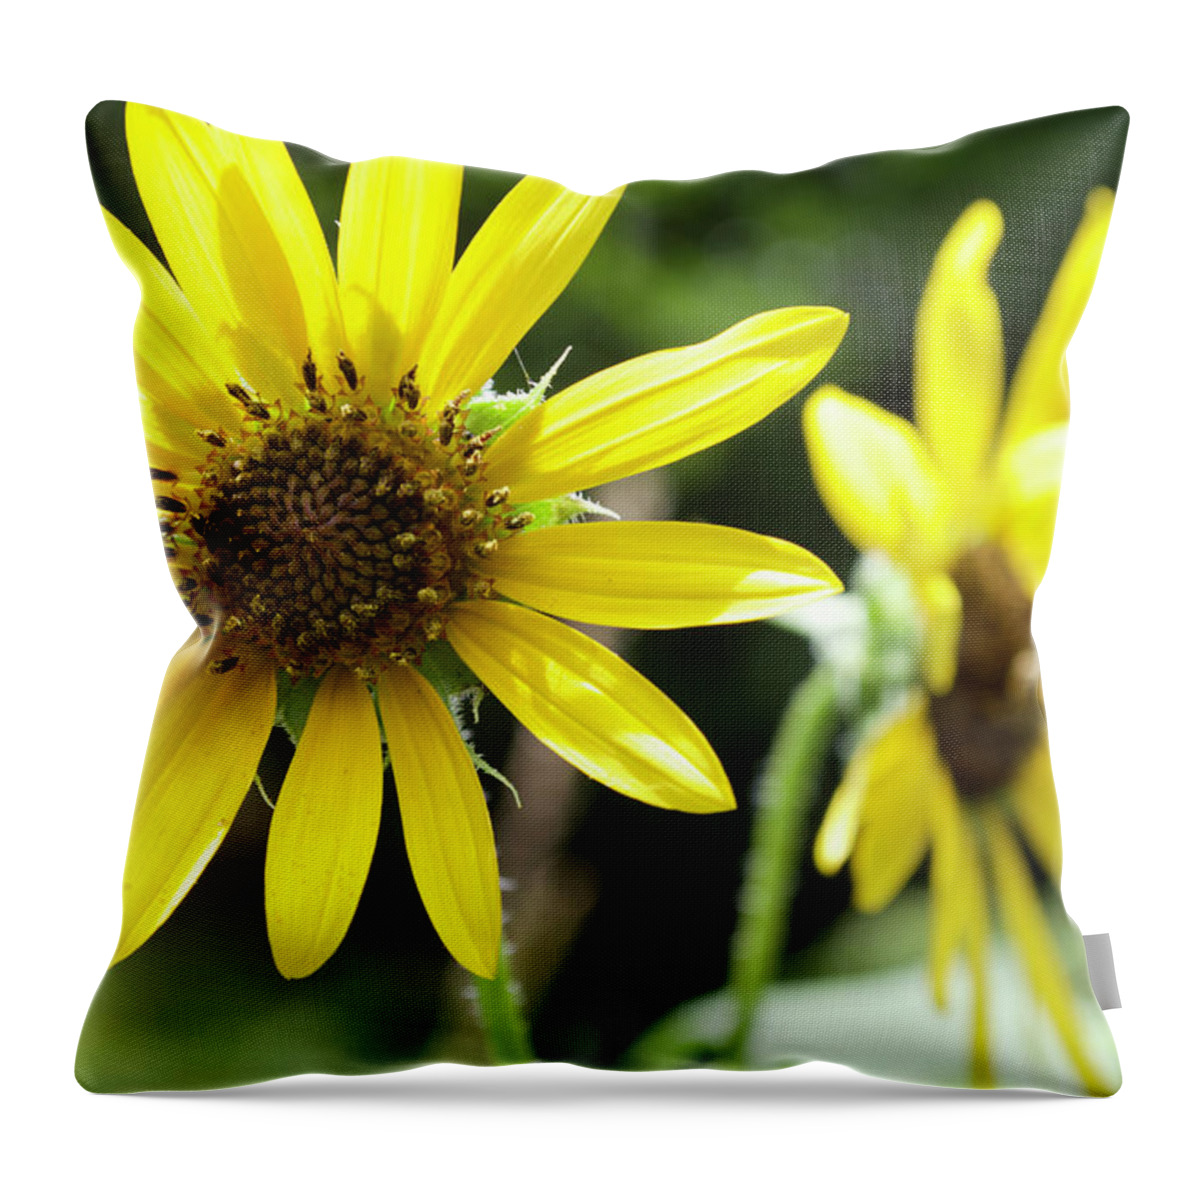  Throw Pillow featuring the photograph Sunflowers #1 by Melissa Torres